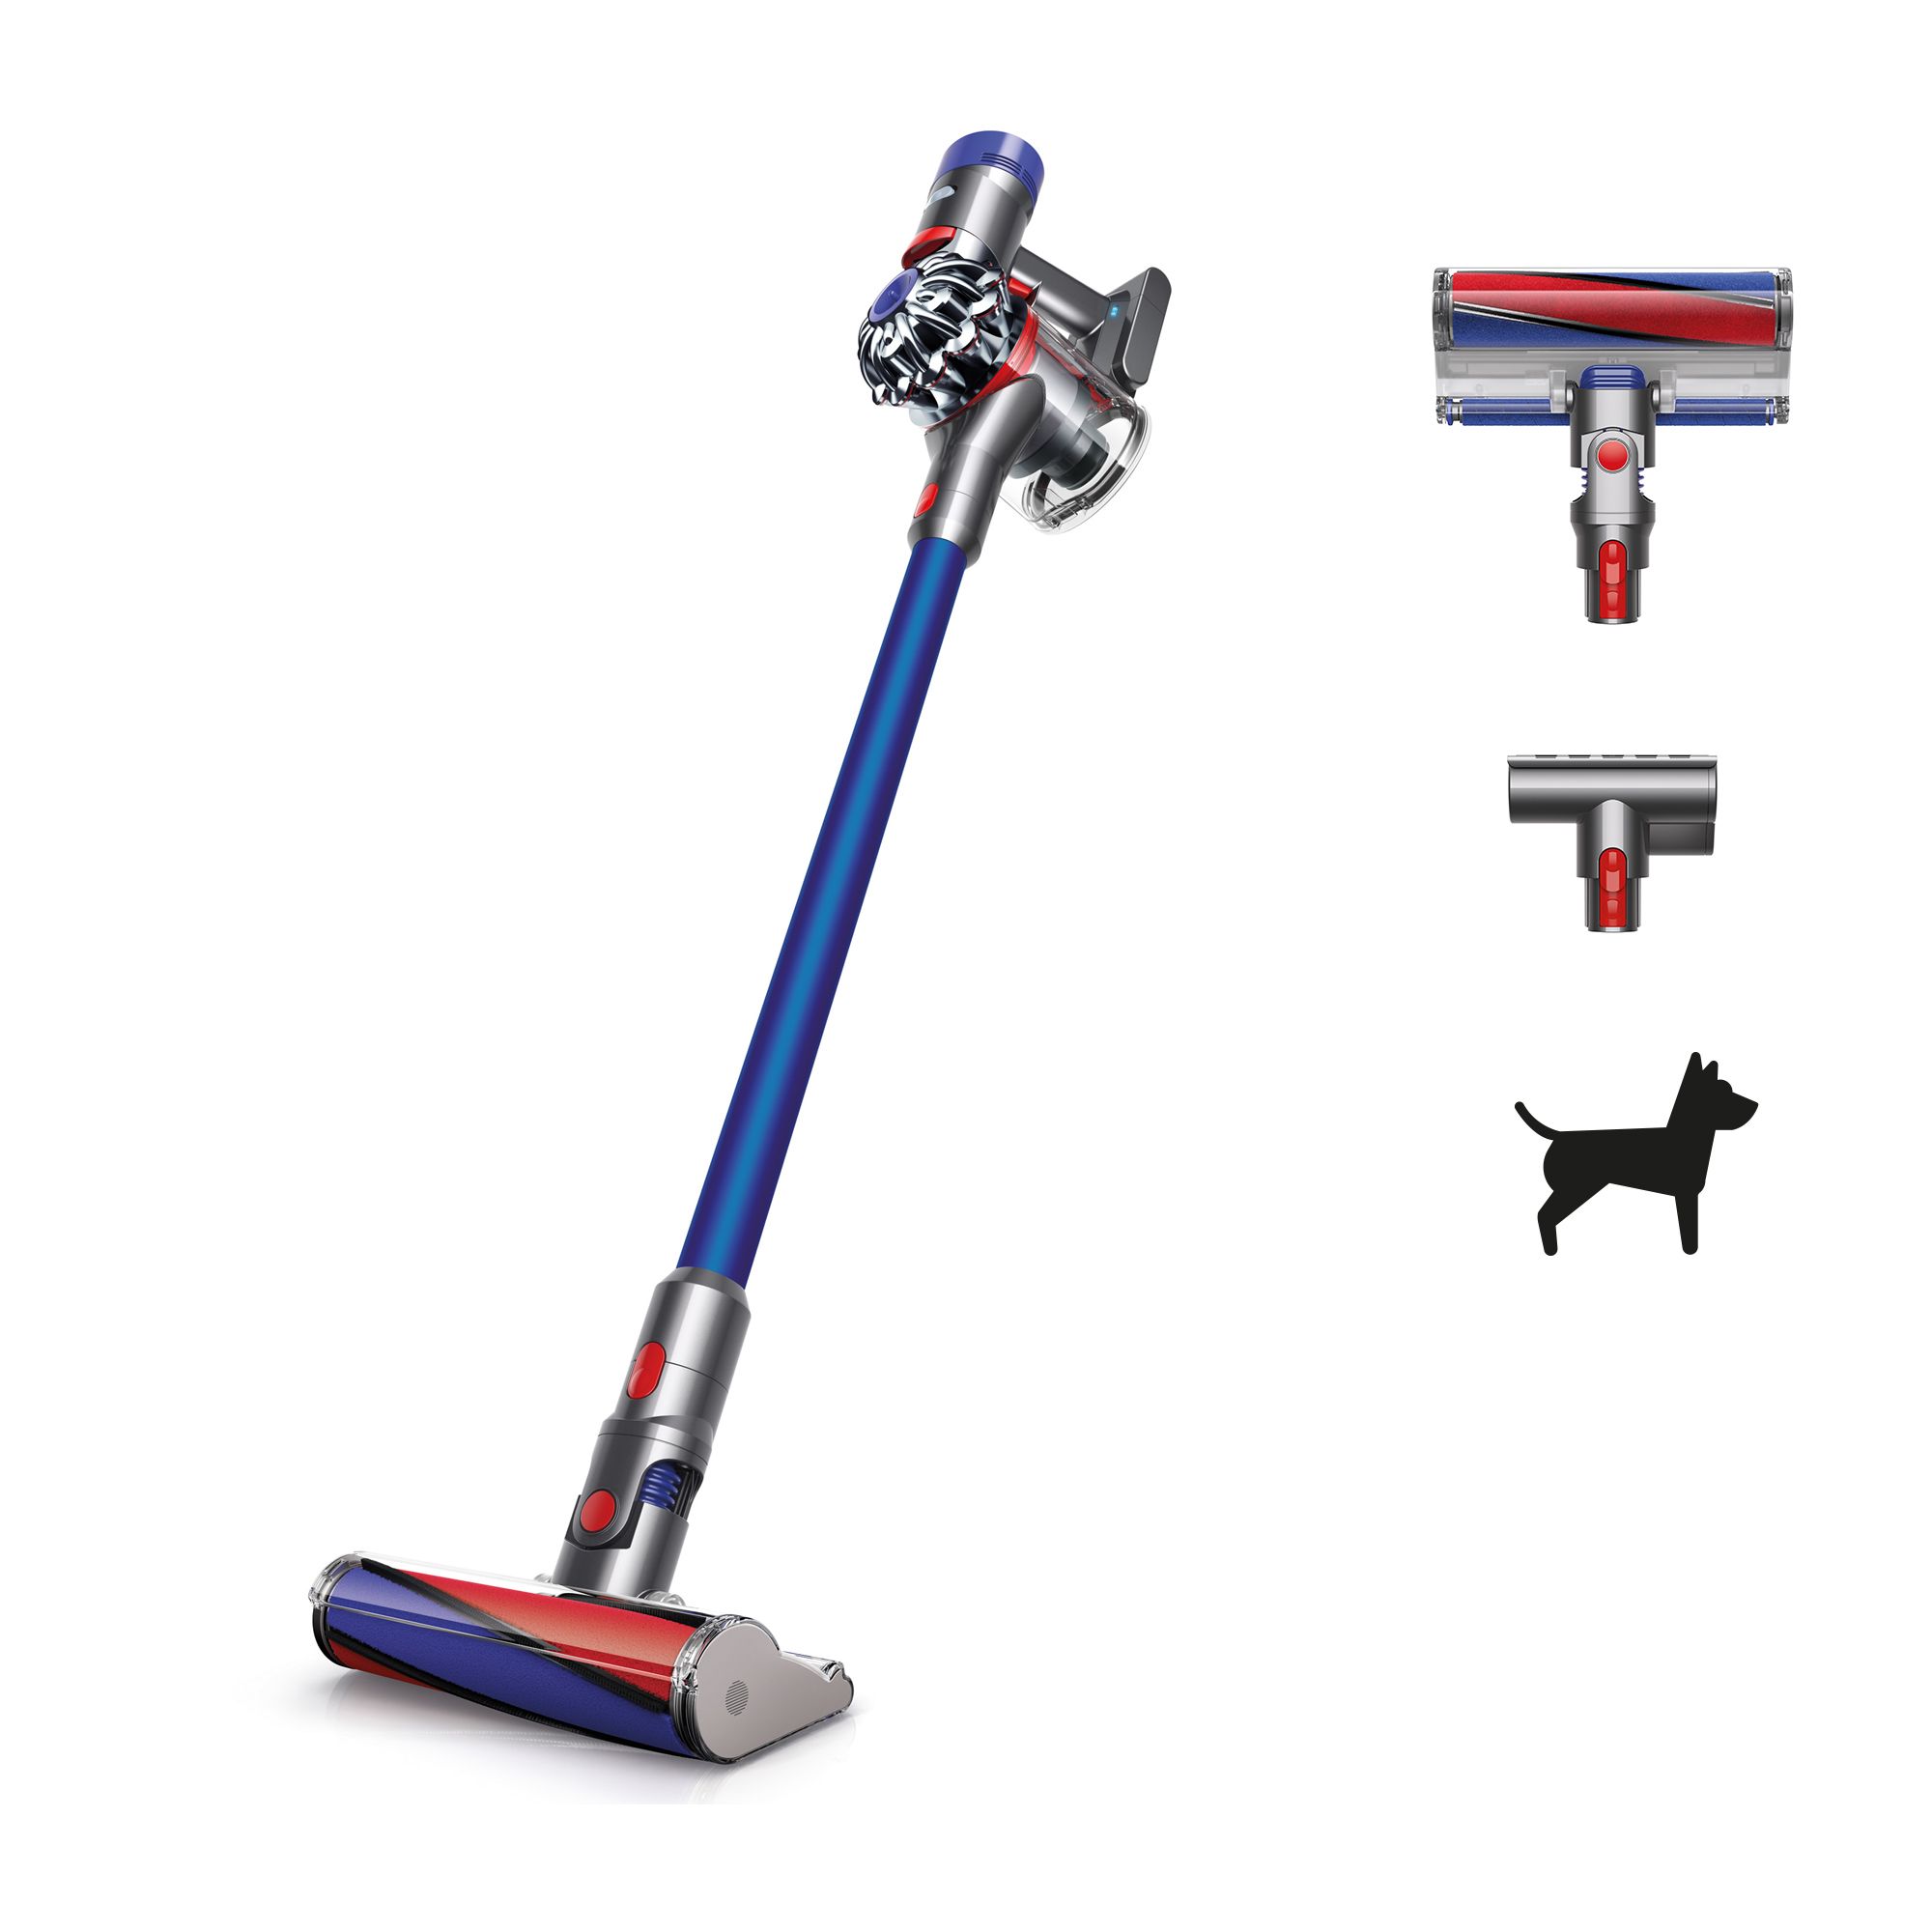 The Best 8 Dyson Vacuums In 2021, Best Dyson Cordless Vacuum For Hardwood Floors And Pet Hair